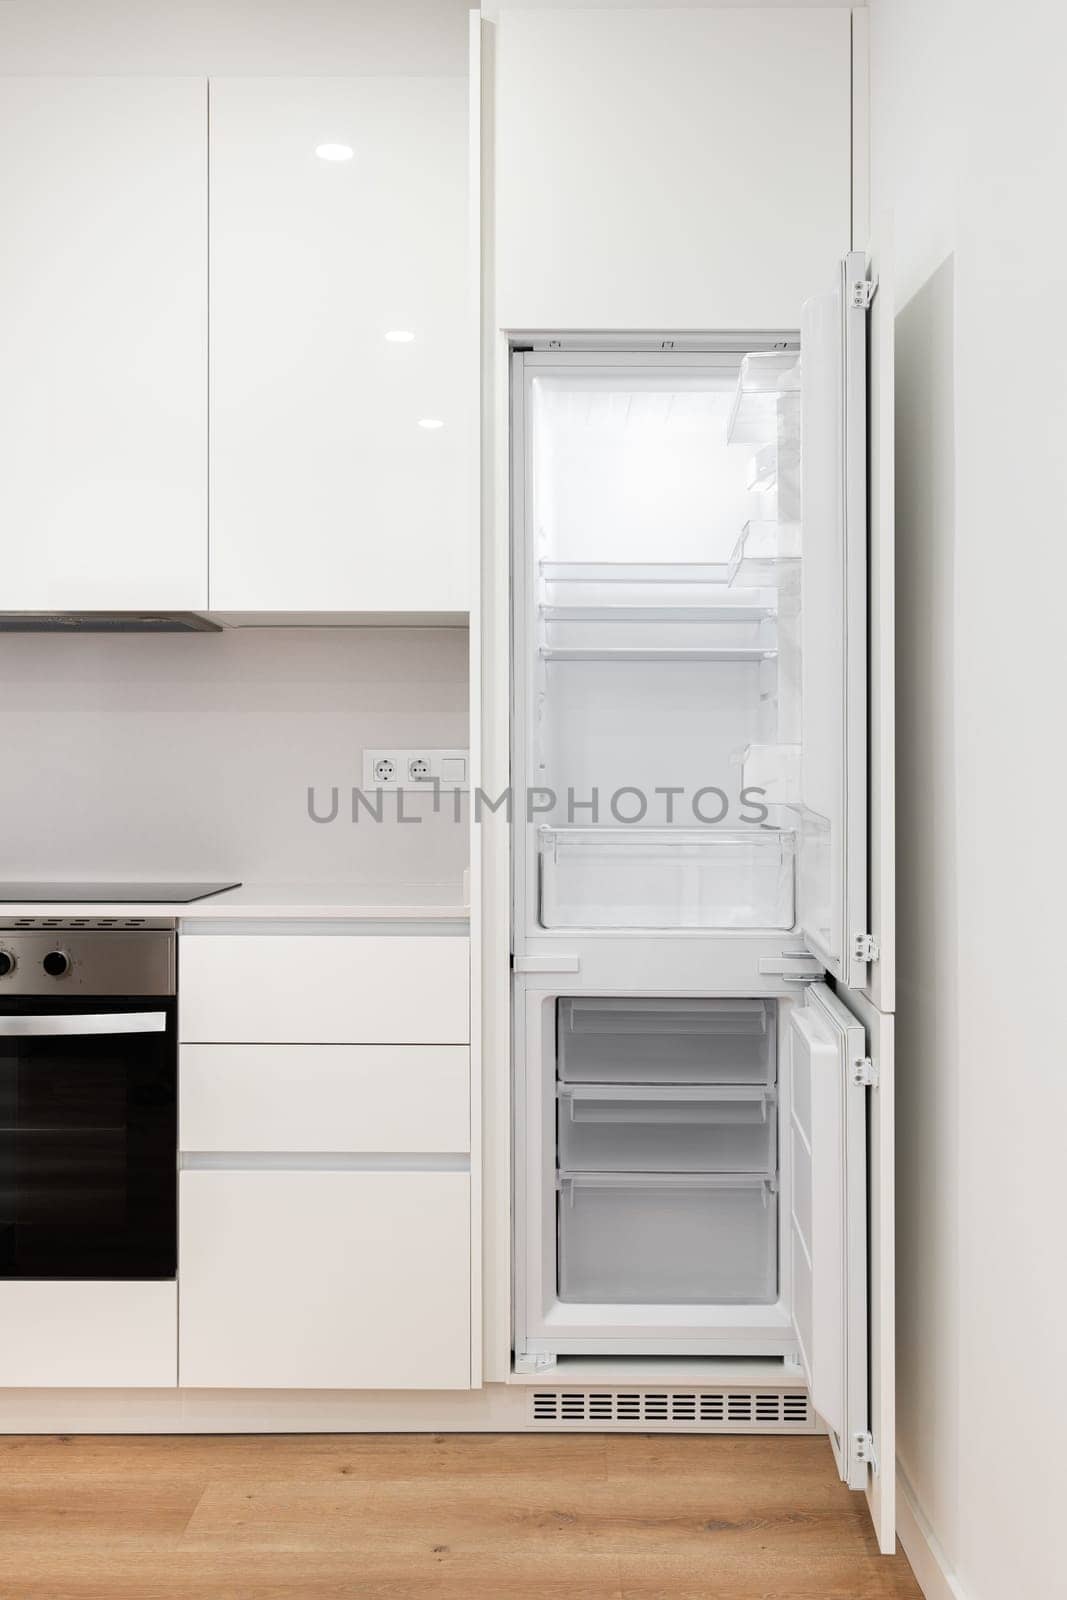 Photo of a modern kitchen with sleek white cabinets and empty refrigerator and freezer with doors open.